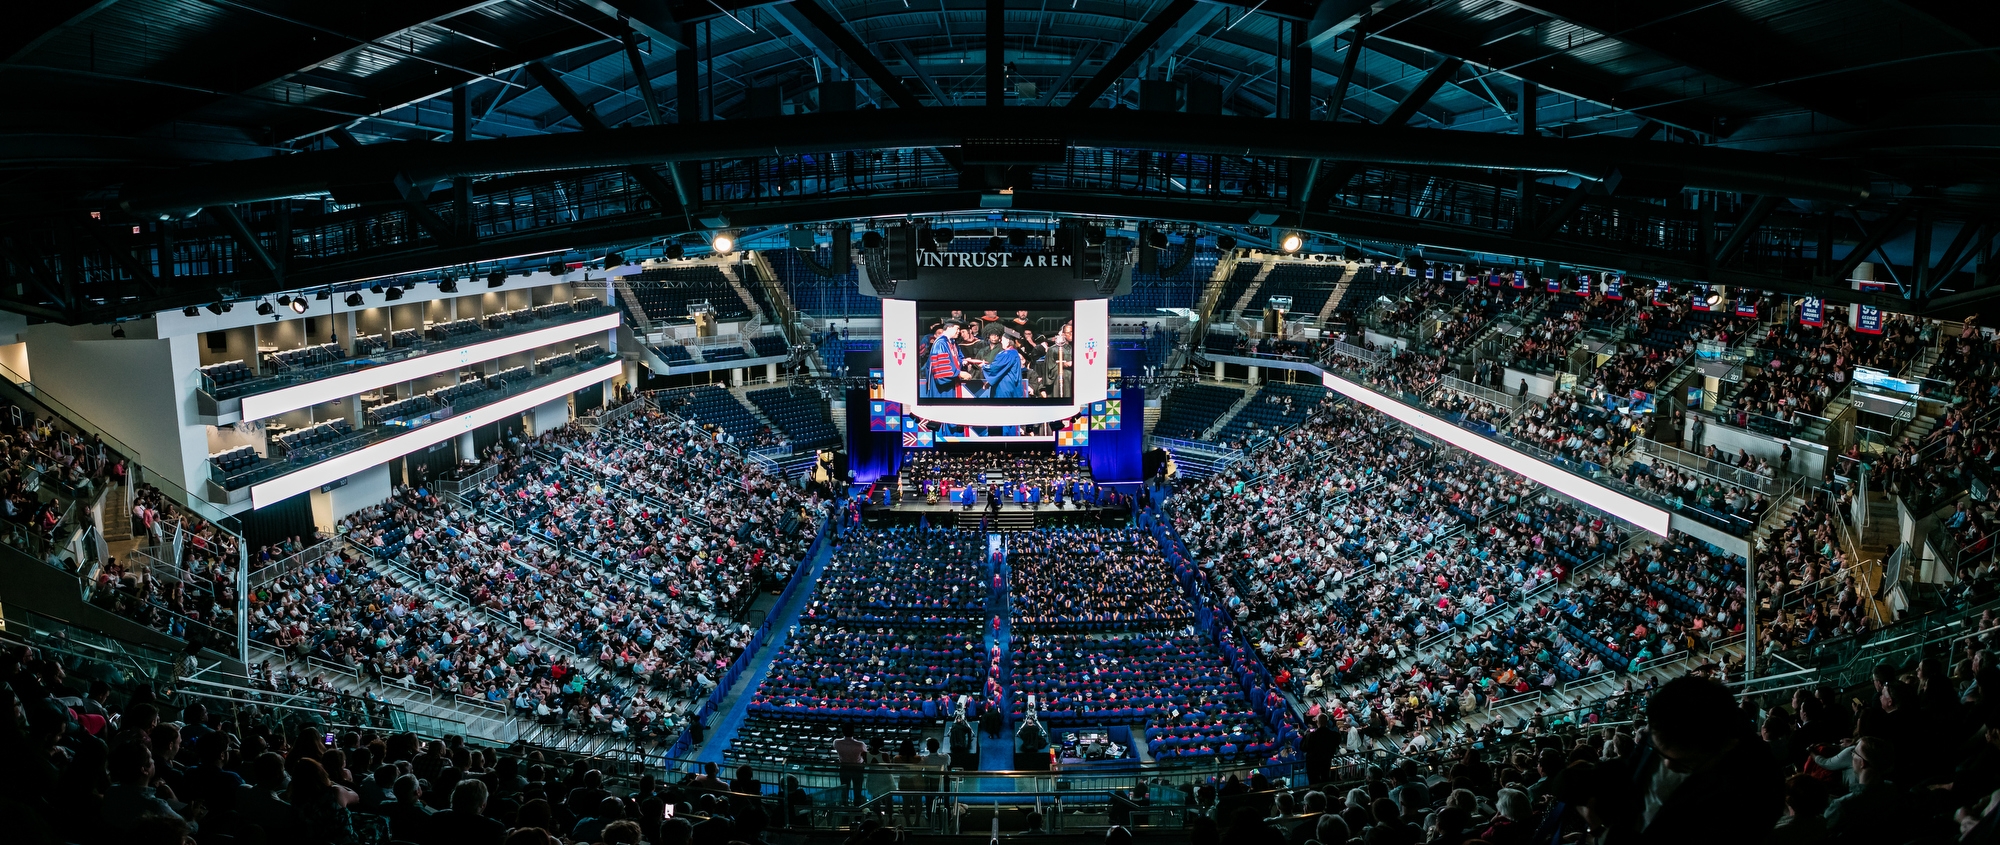 Graduates, friends and family fill Wintrust Arena during one of five ceremonies held in Chicago by DePaul University  over commencement weekend. (DePaul University/Jeff Carrion)